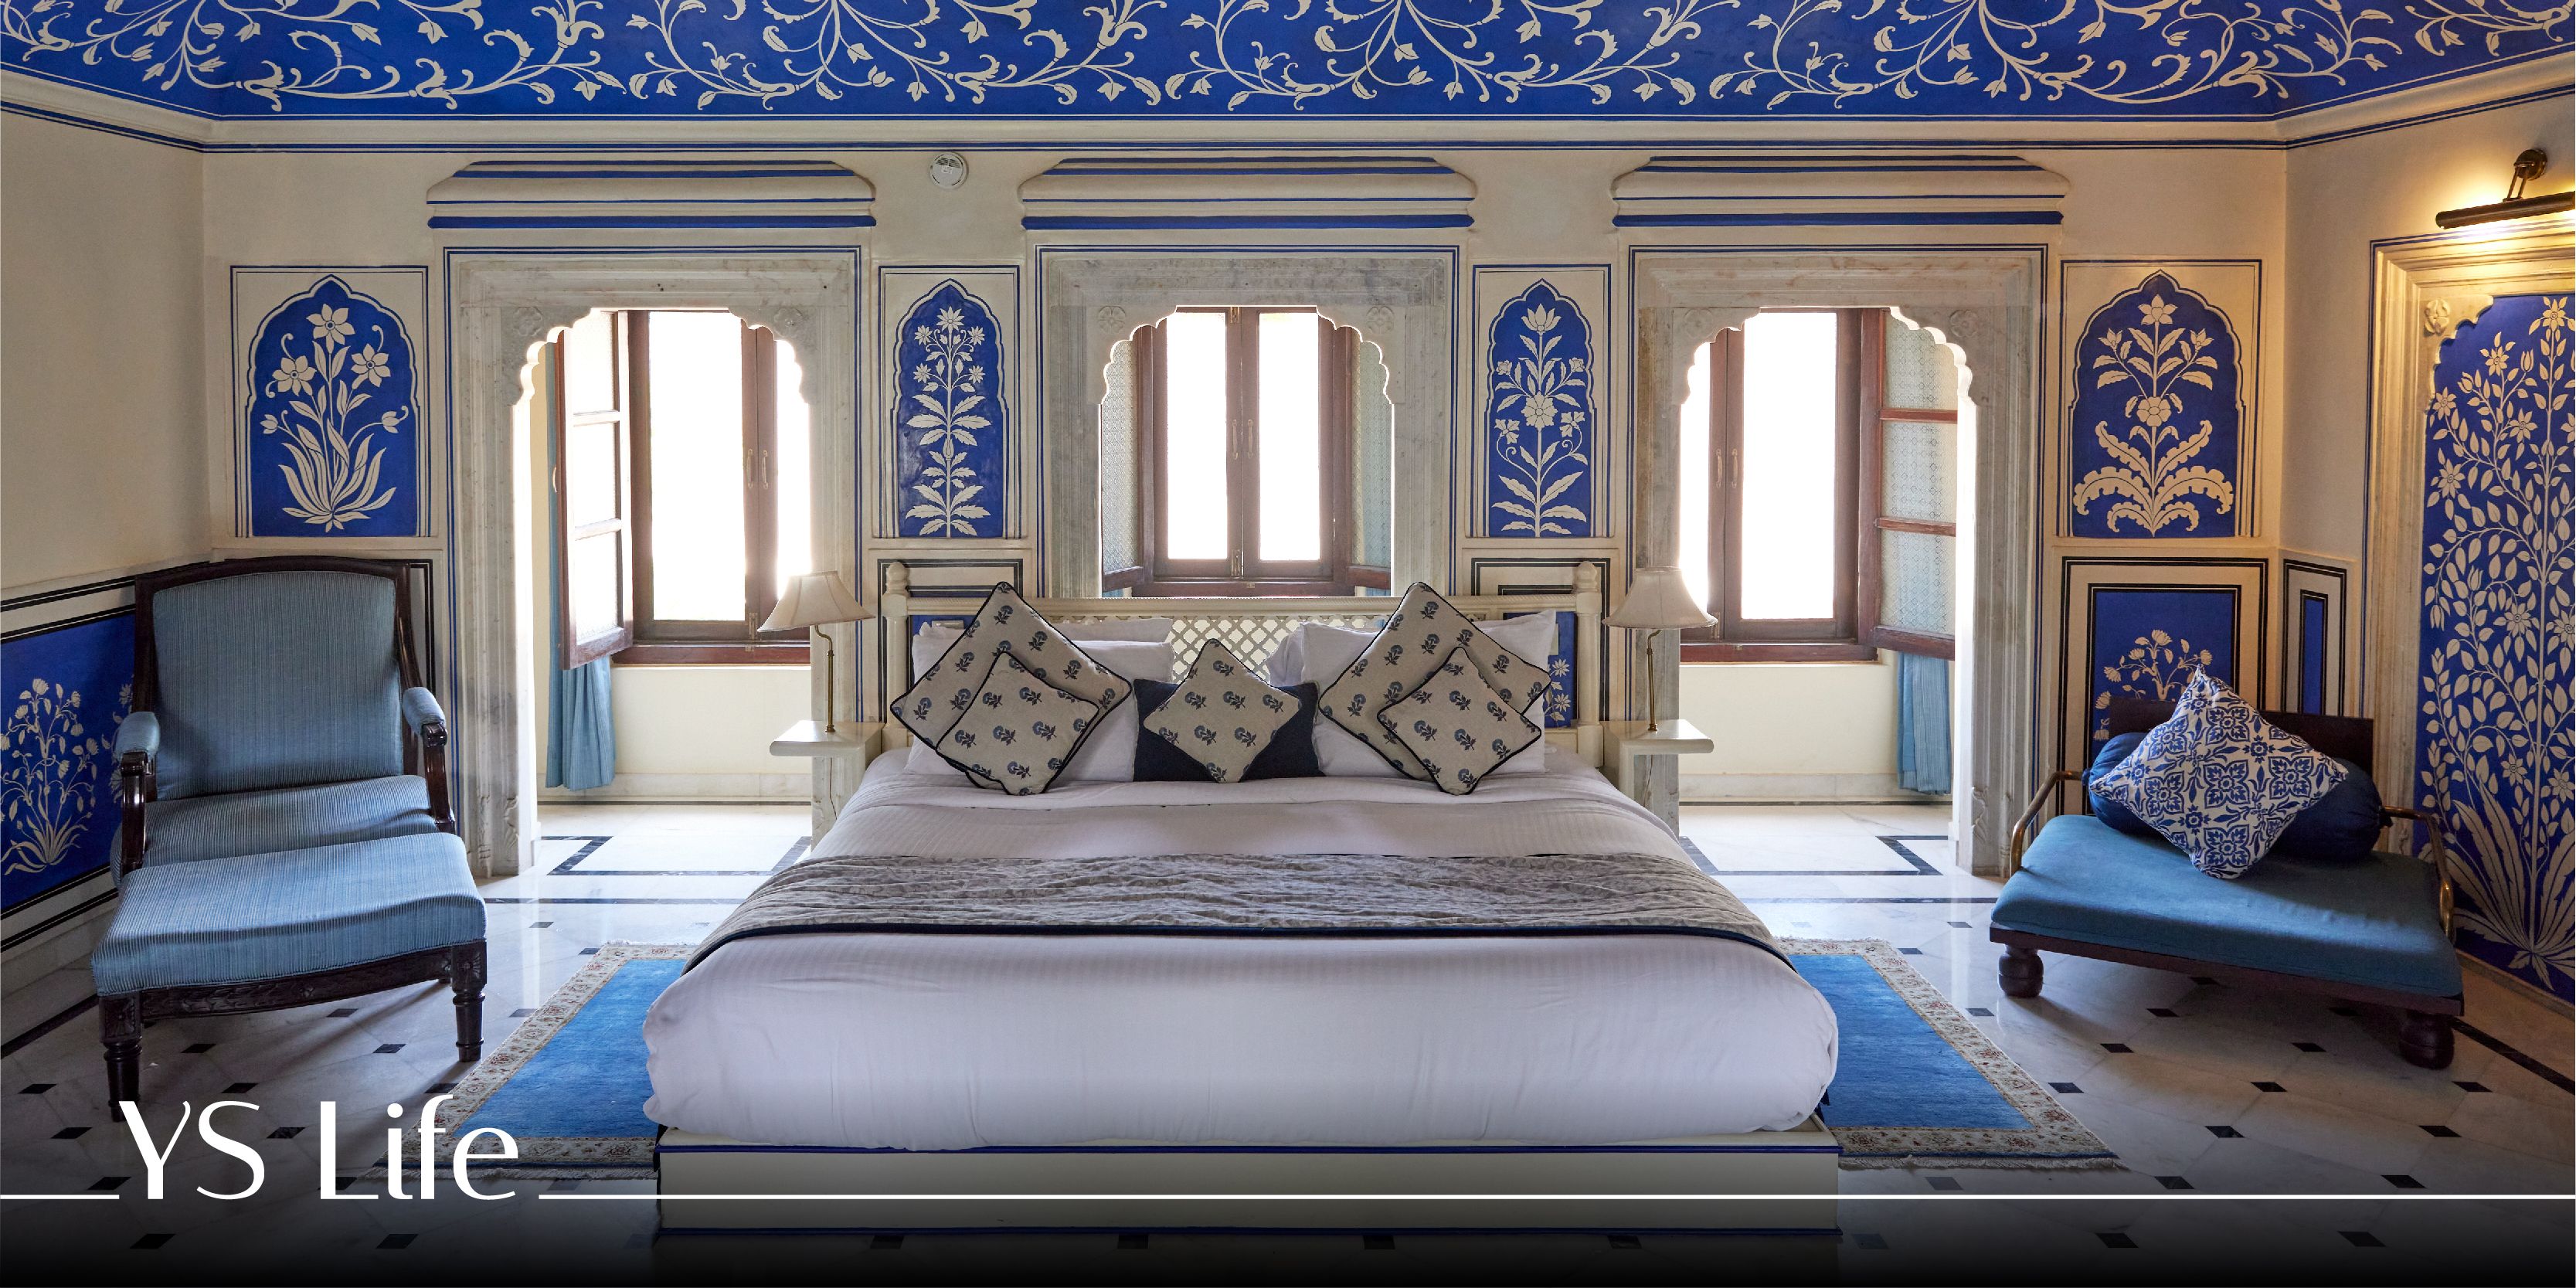 Immerse in history and regality at this ancient haveli in Jaipur